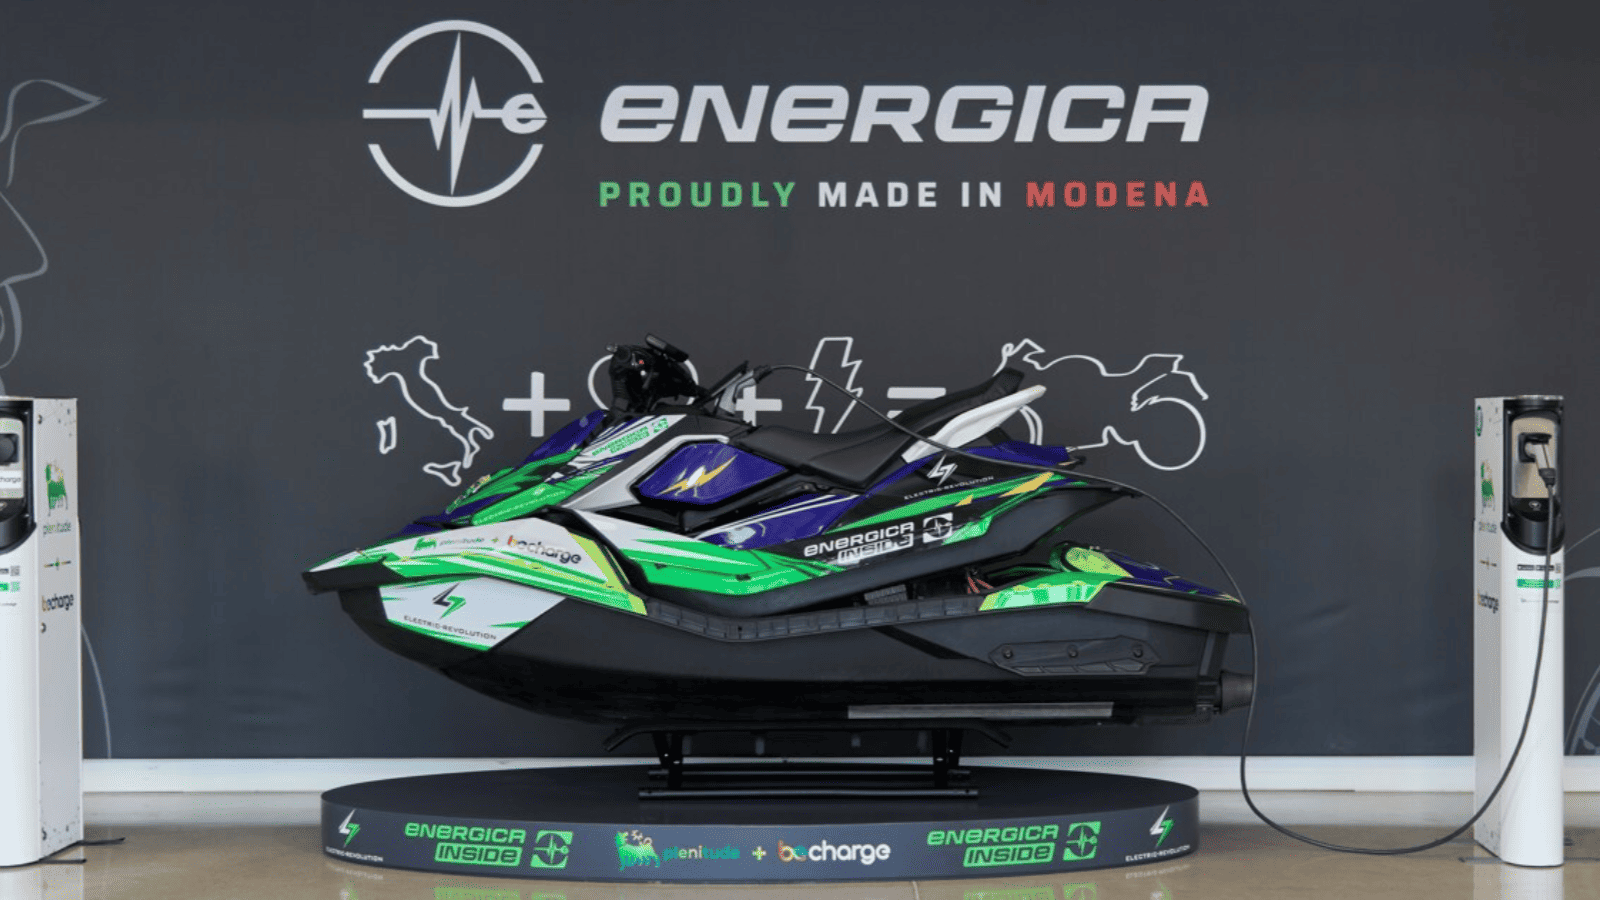 Energica and Plenitude (Eni) develop electric solutions for marine applications.